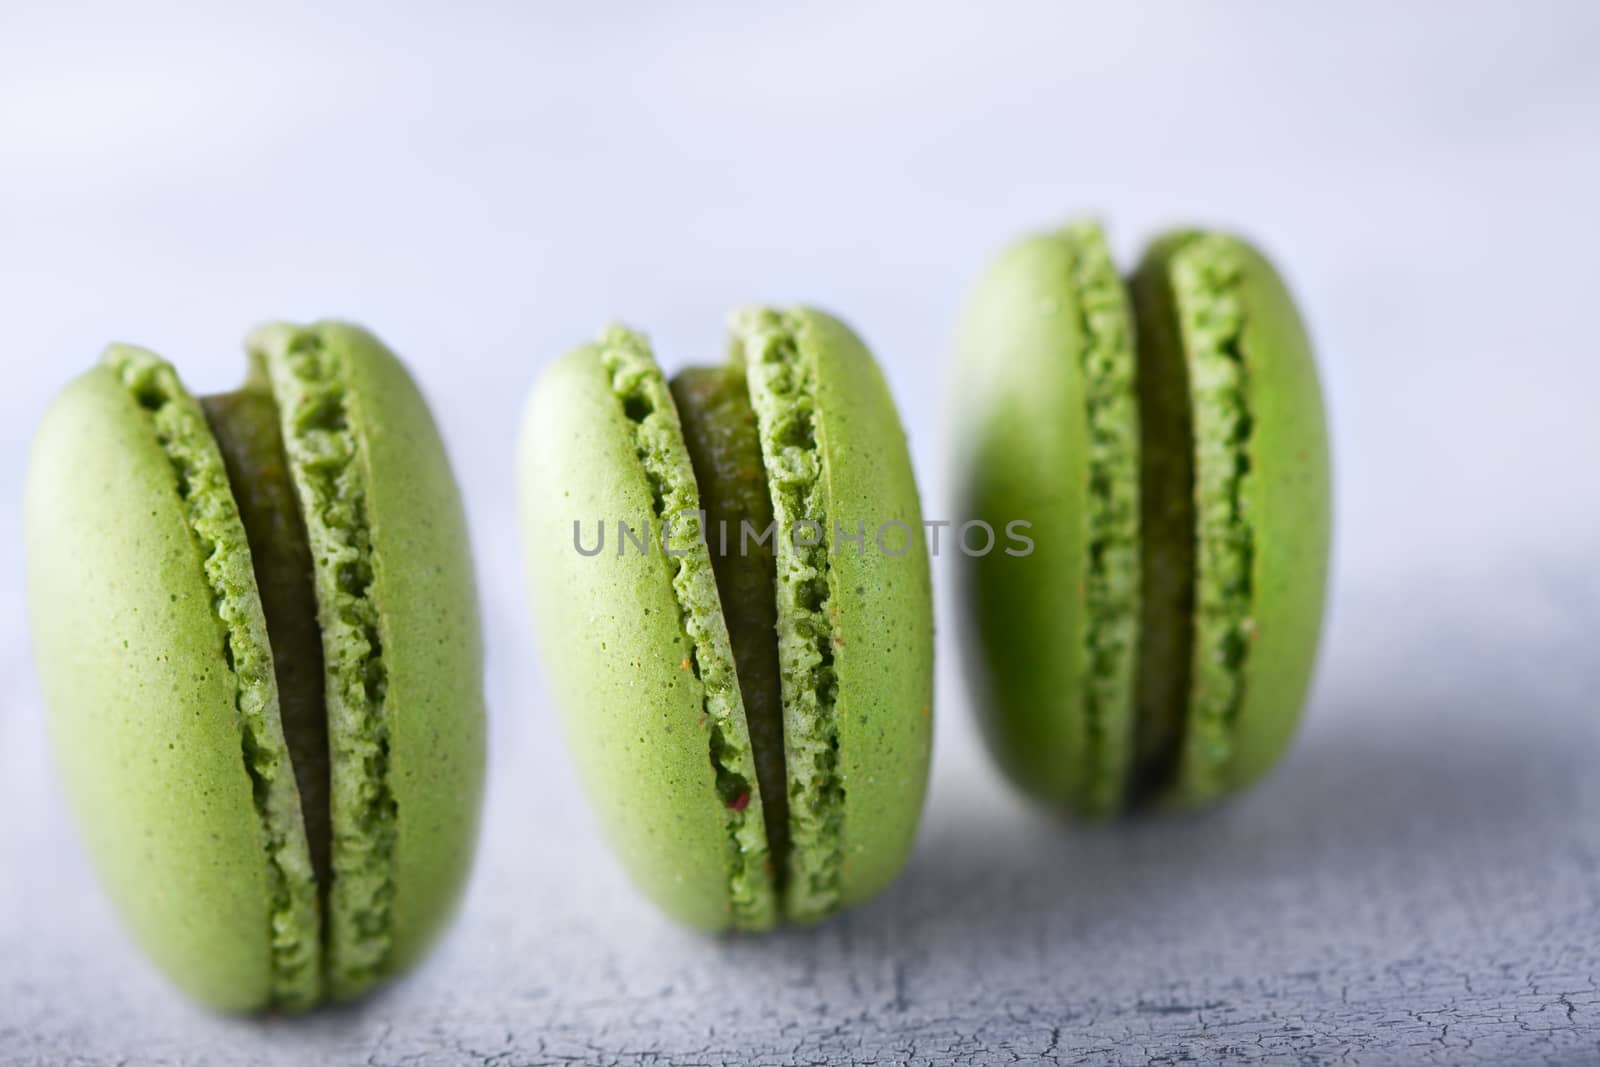 French pistachios macaroons by supercat67